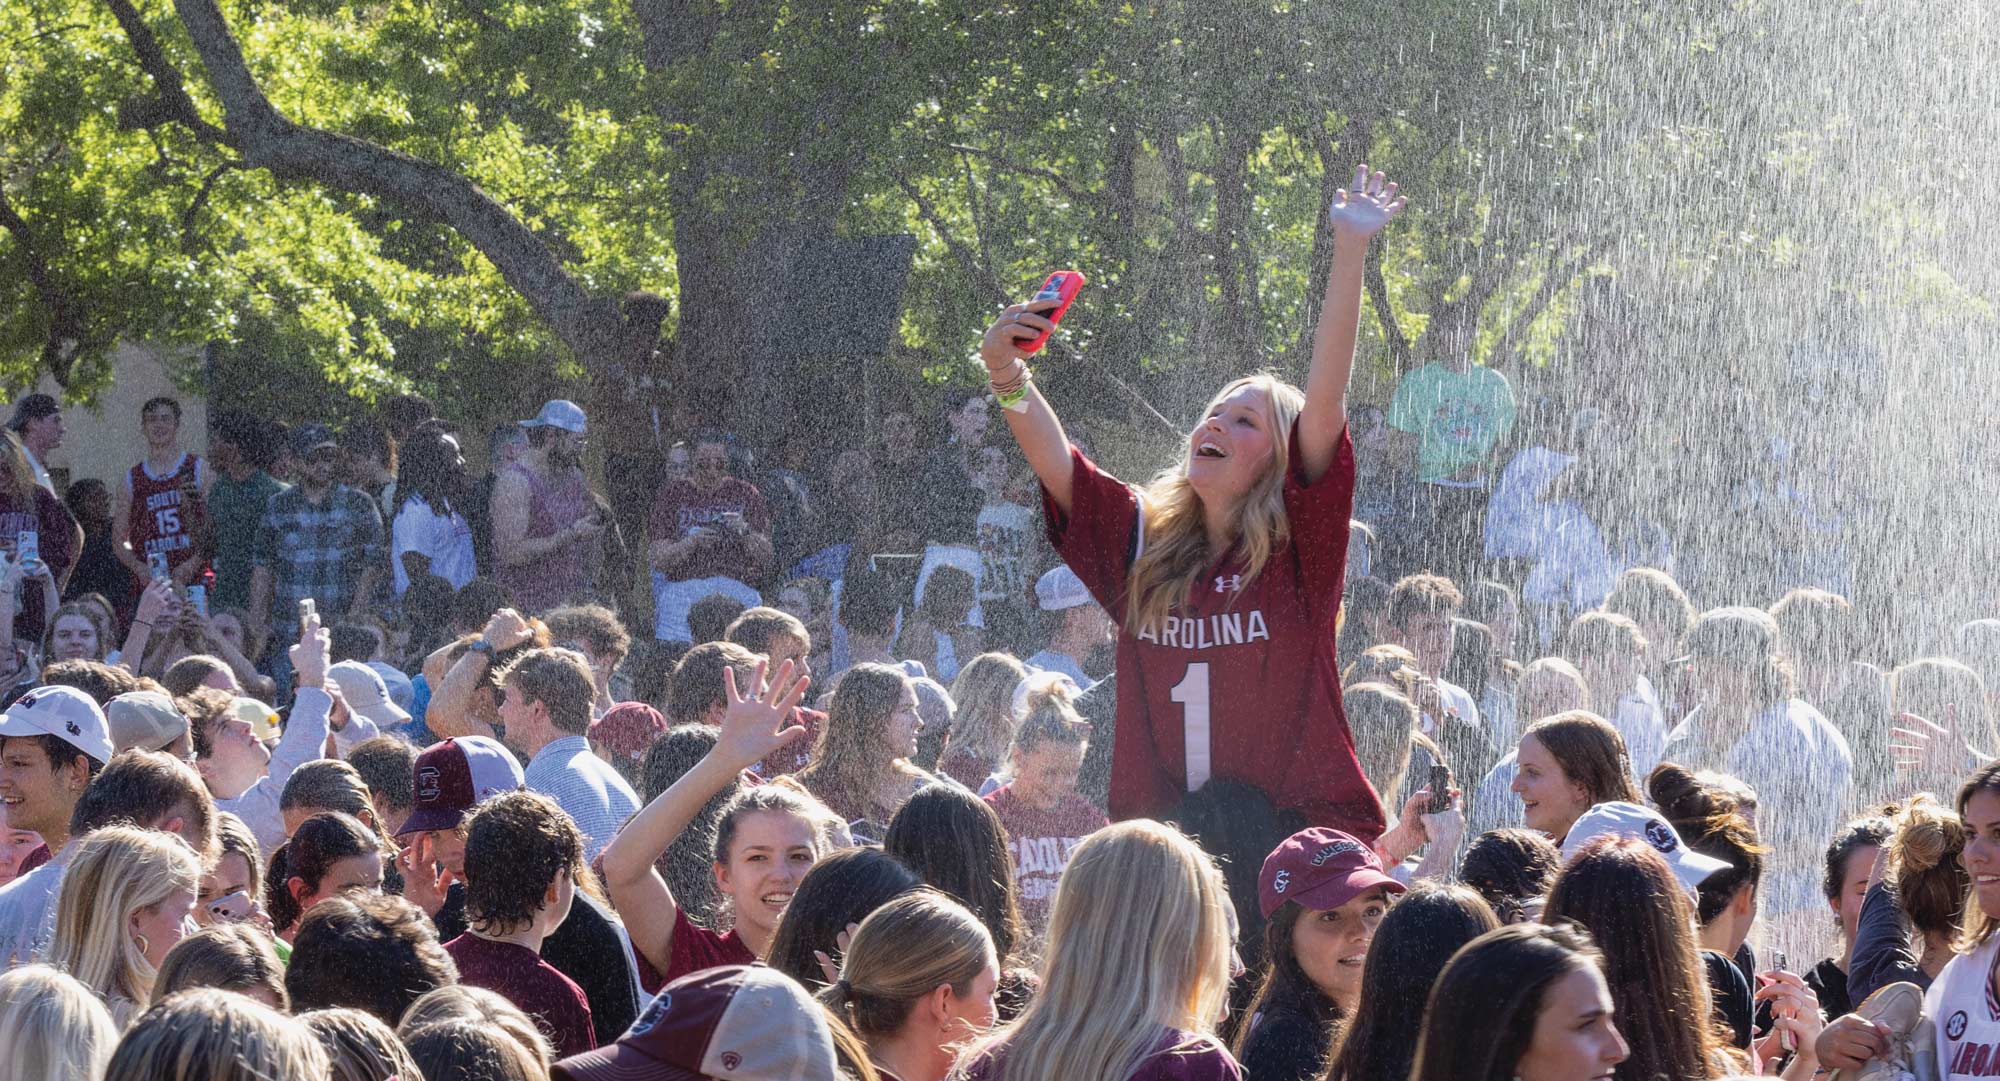 Students celebrate the womens basketball championship win at the Thomas-Cooper reflecting pool.